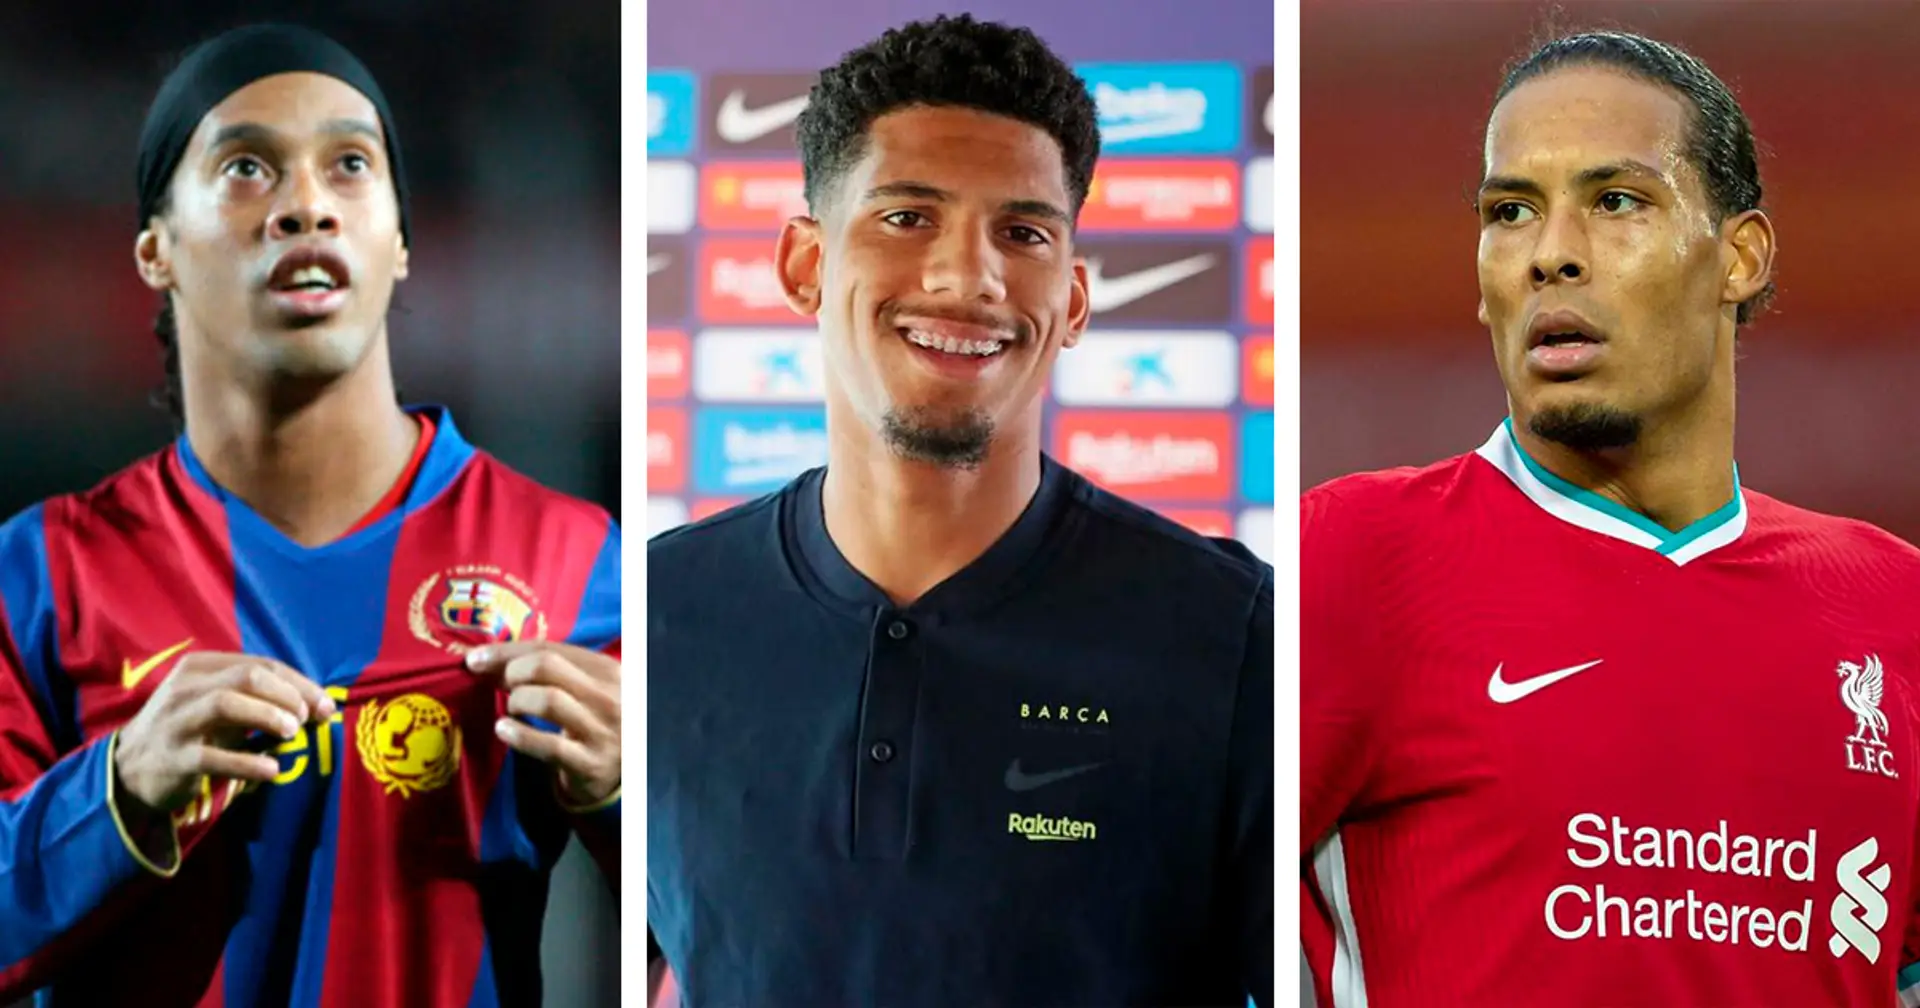 From Ronaldinho to Van Dijk: Araujo opens up on his preferences in football